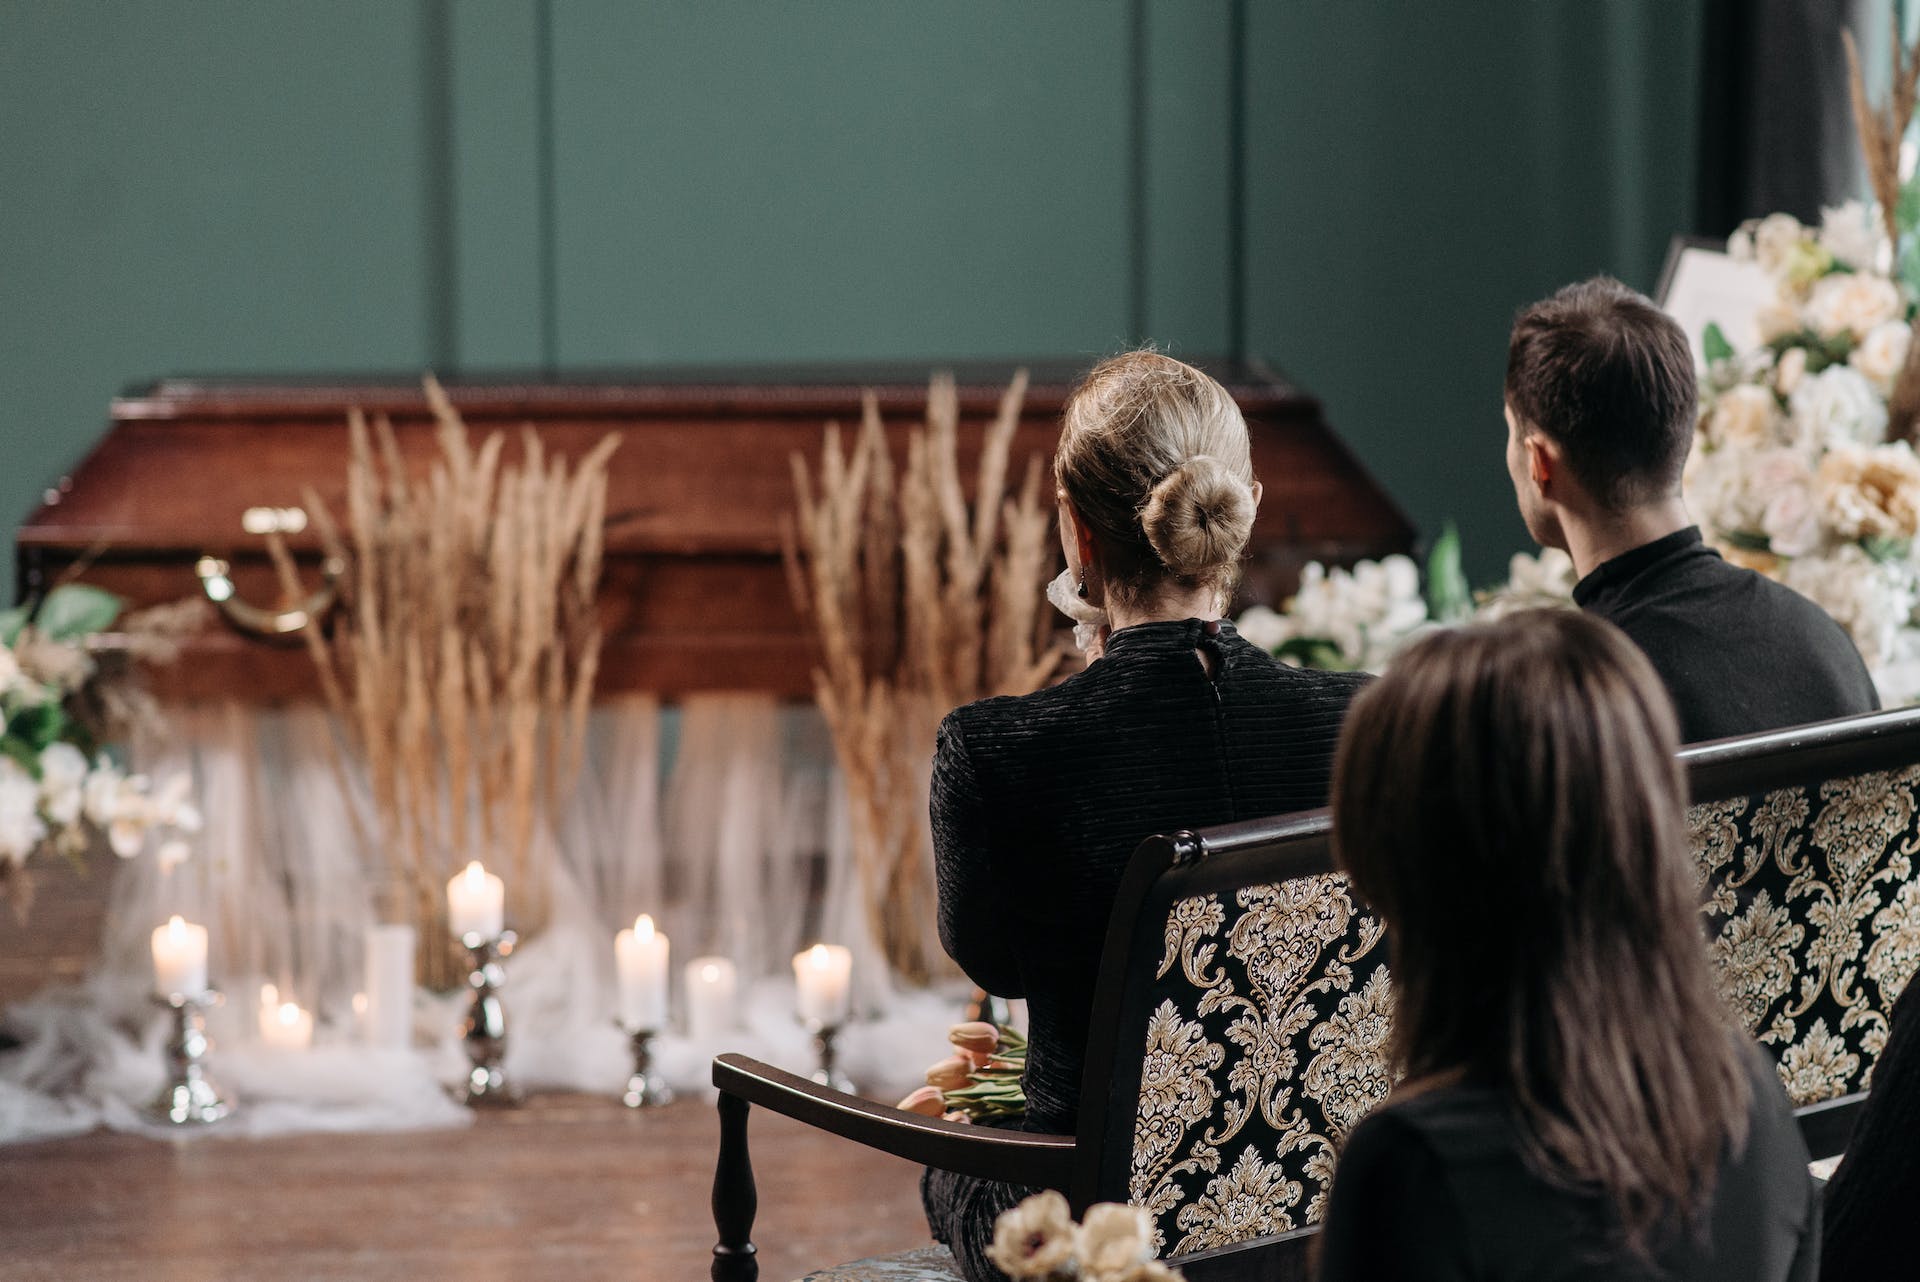 Family at a funeral | Source: Pexels